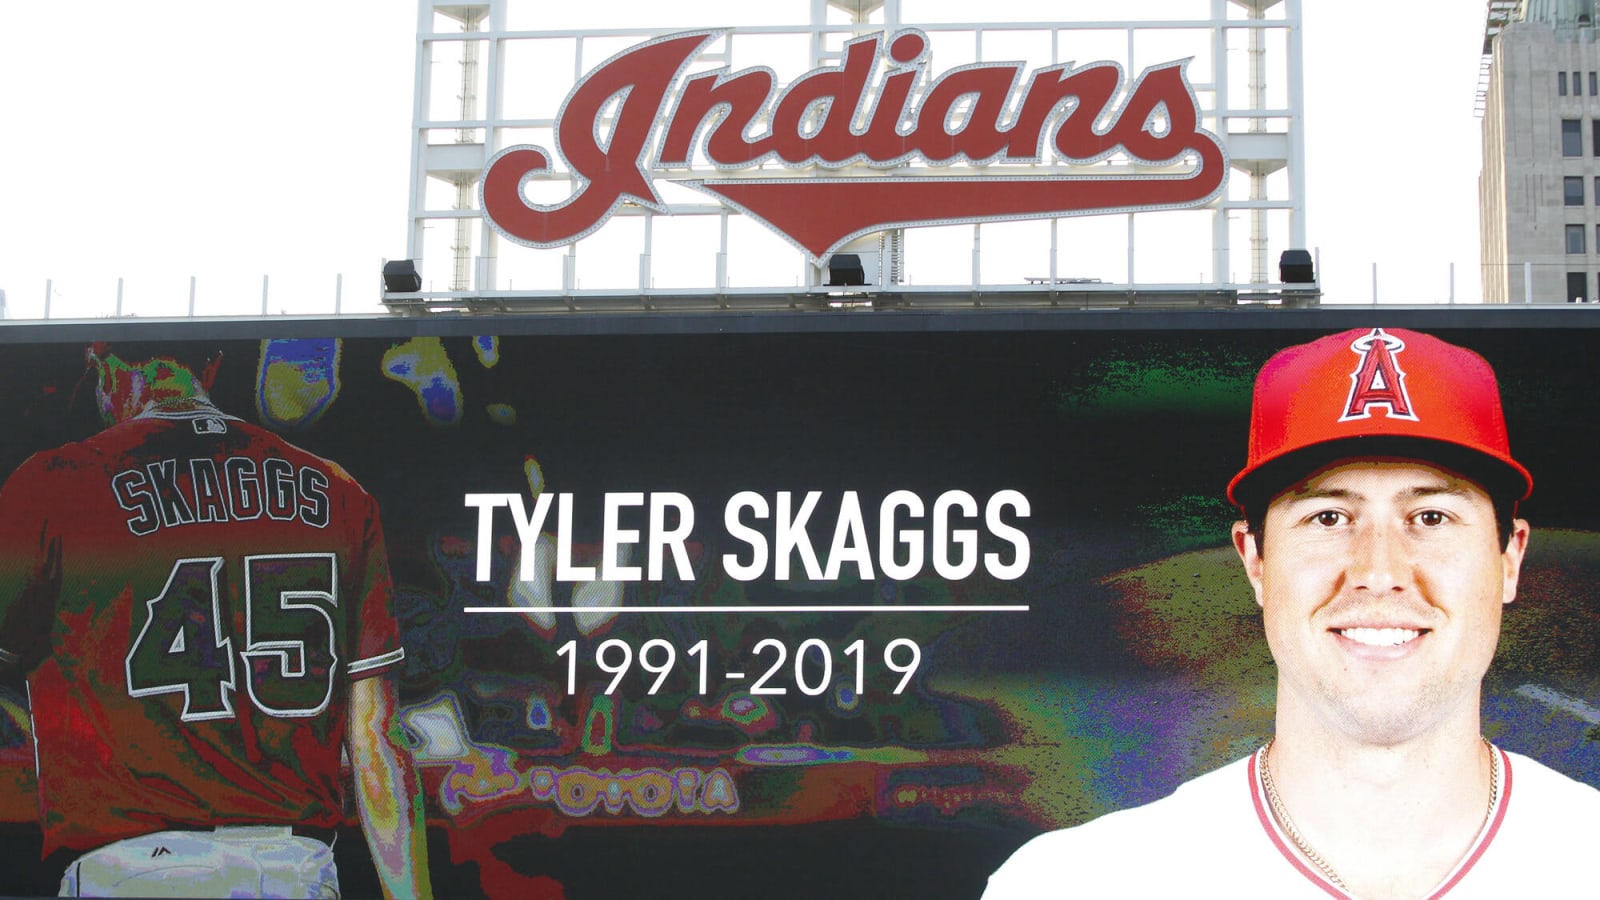  Family Of Tyler Skaggs Files Wrongful Death Lawsuit